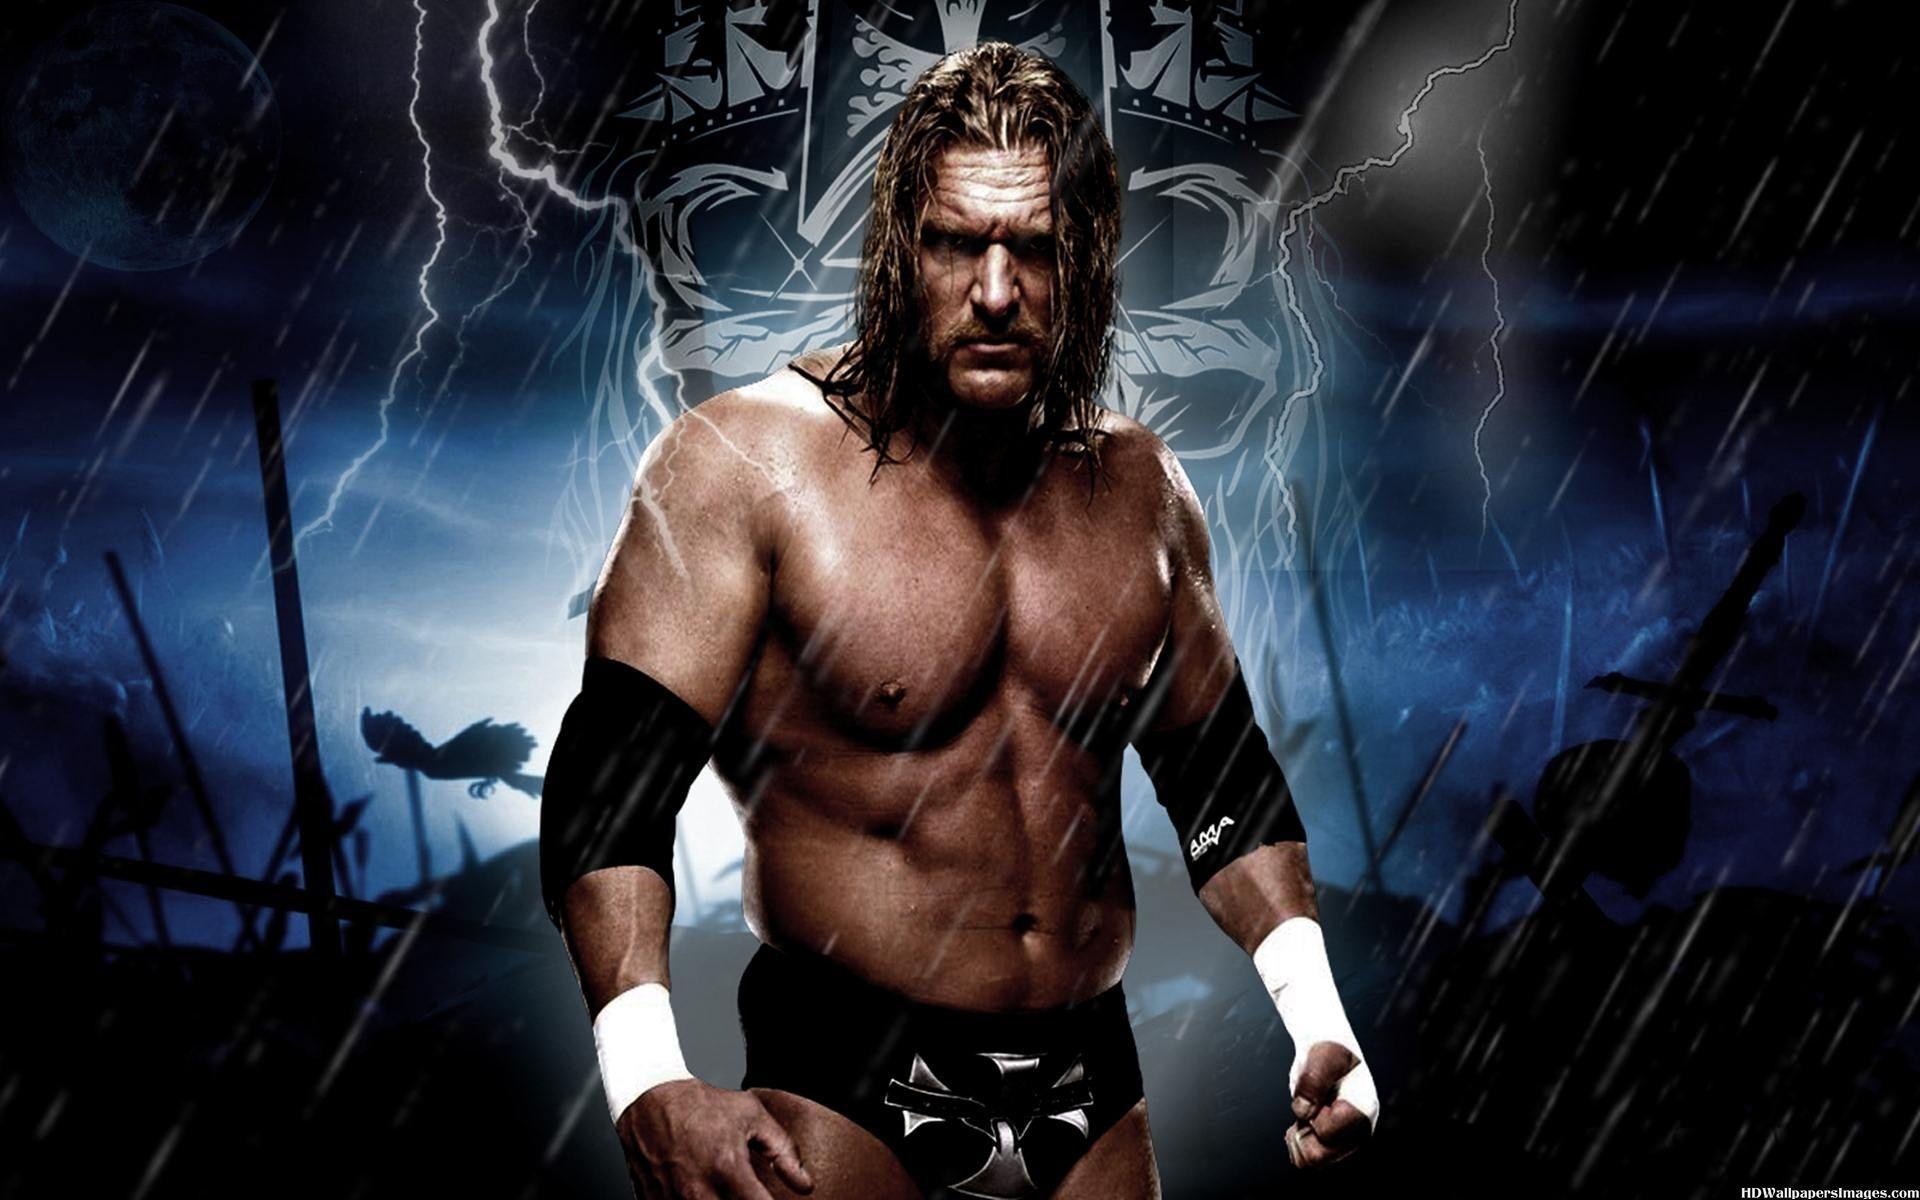 The Game Triple H image. Beautiful image HD Picture & Desktop